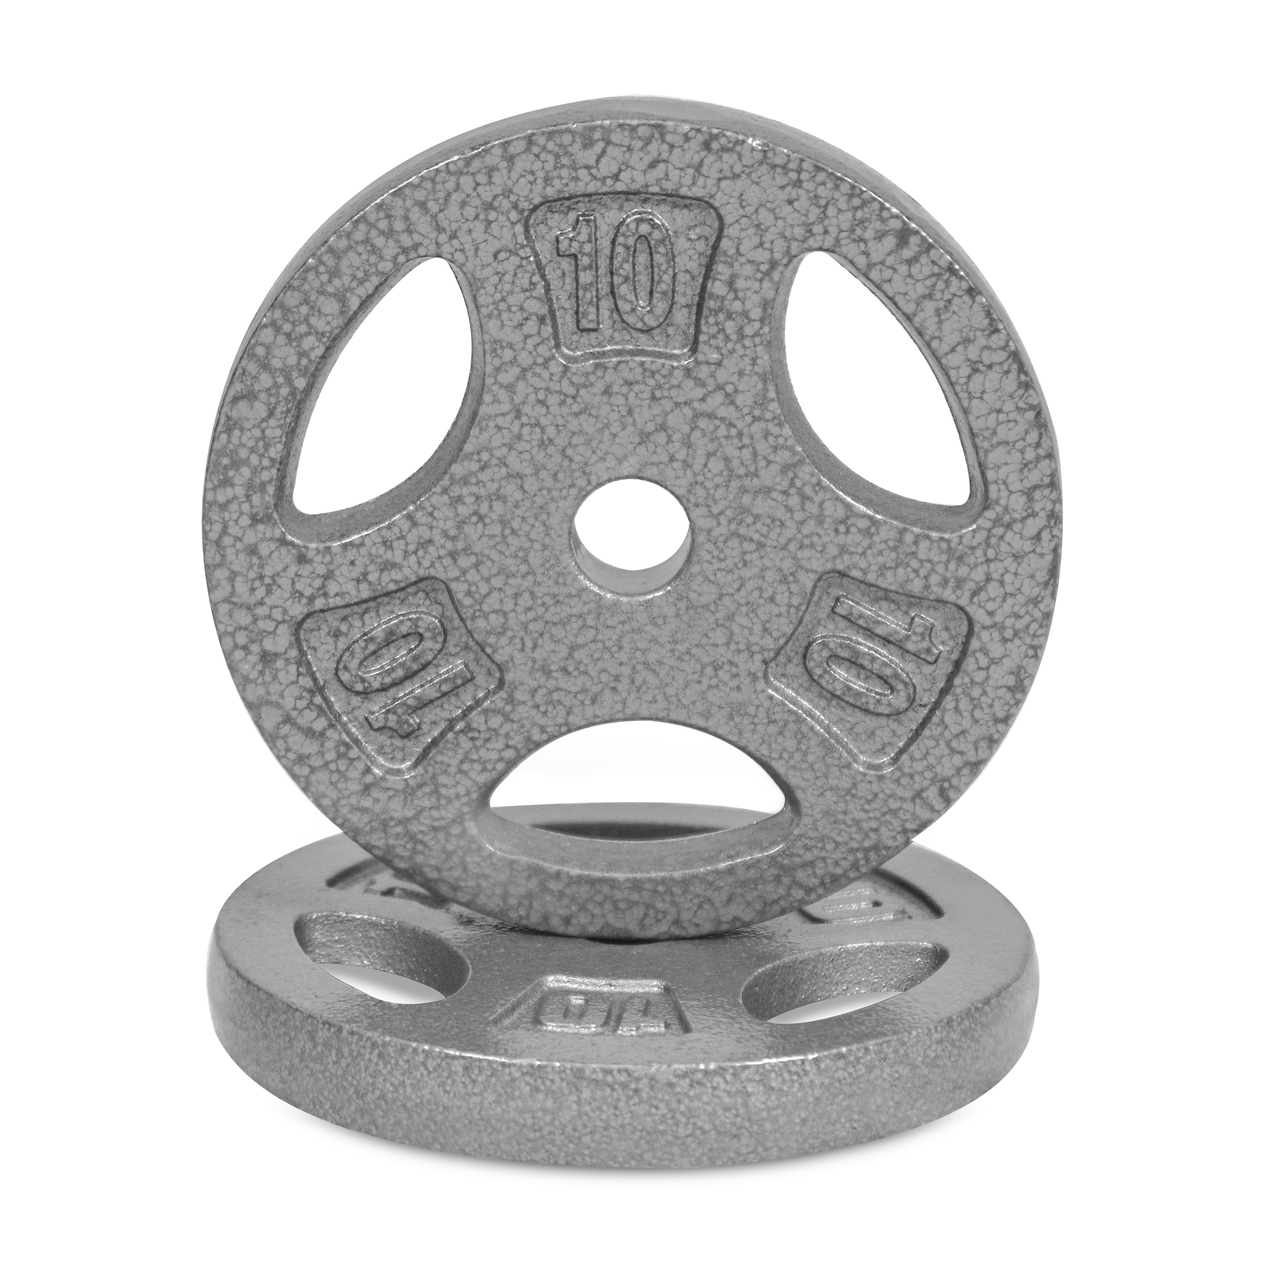 Detail Cap Barbell 1 Hole Weight Lifting Plates Nomer 3